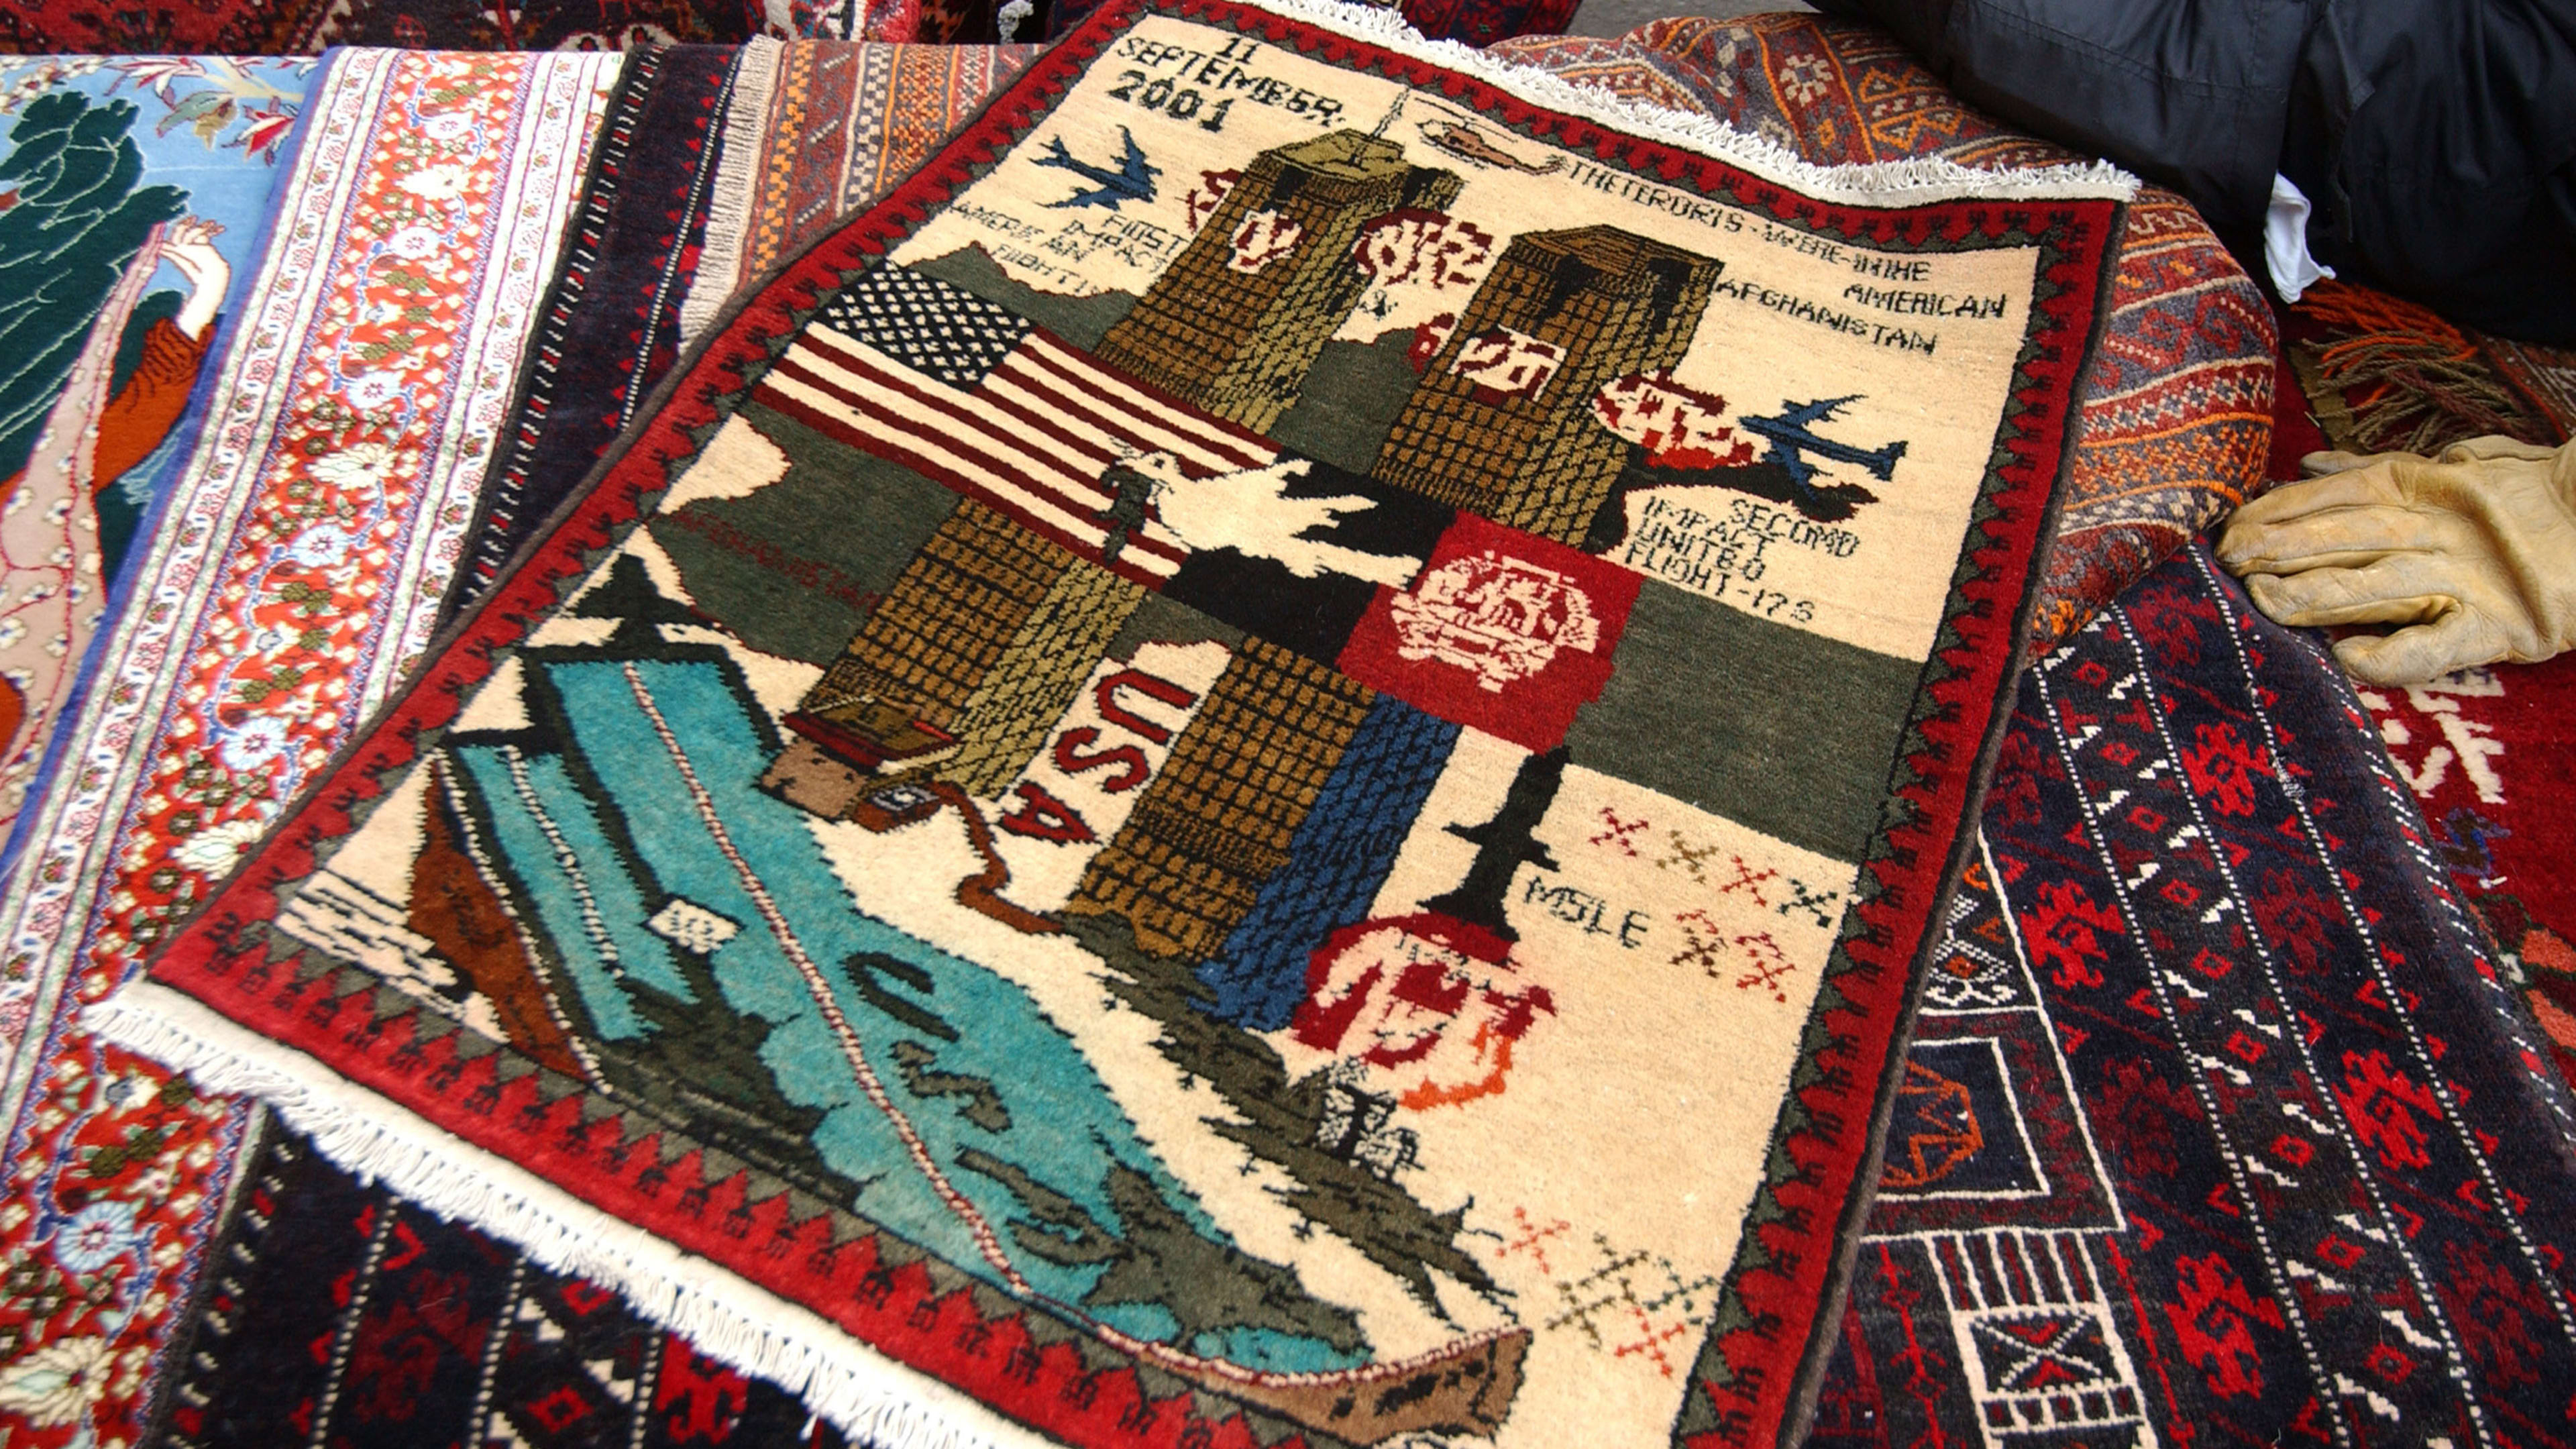 The real story behind Afghanistan’s war rugs